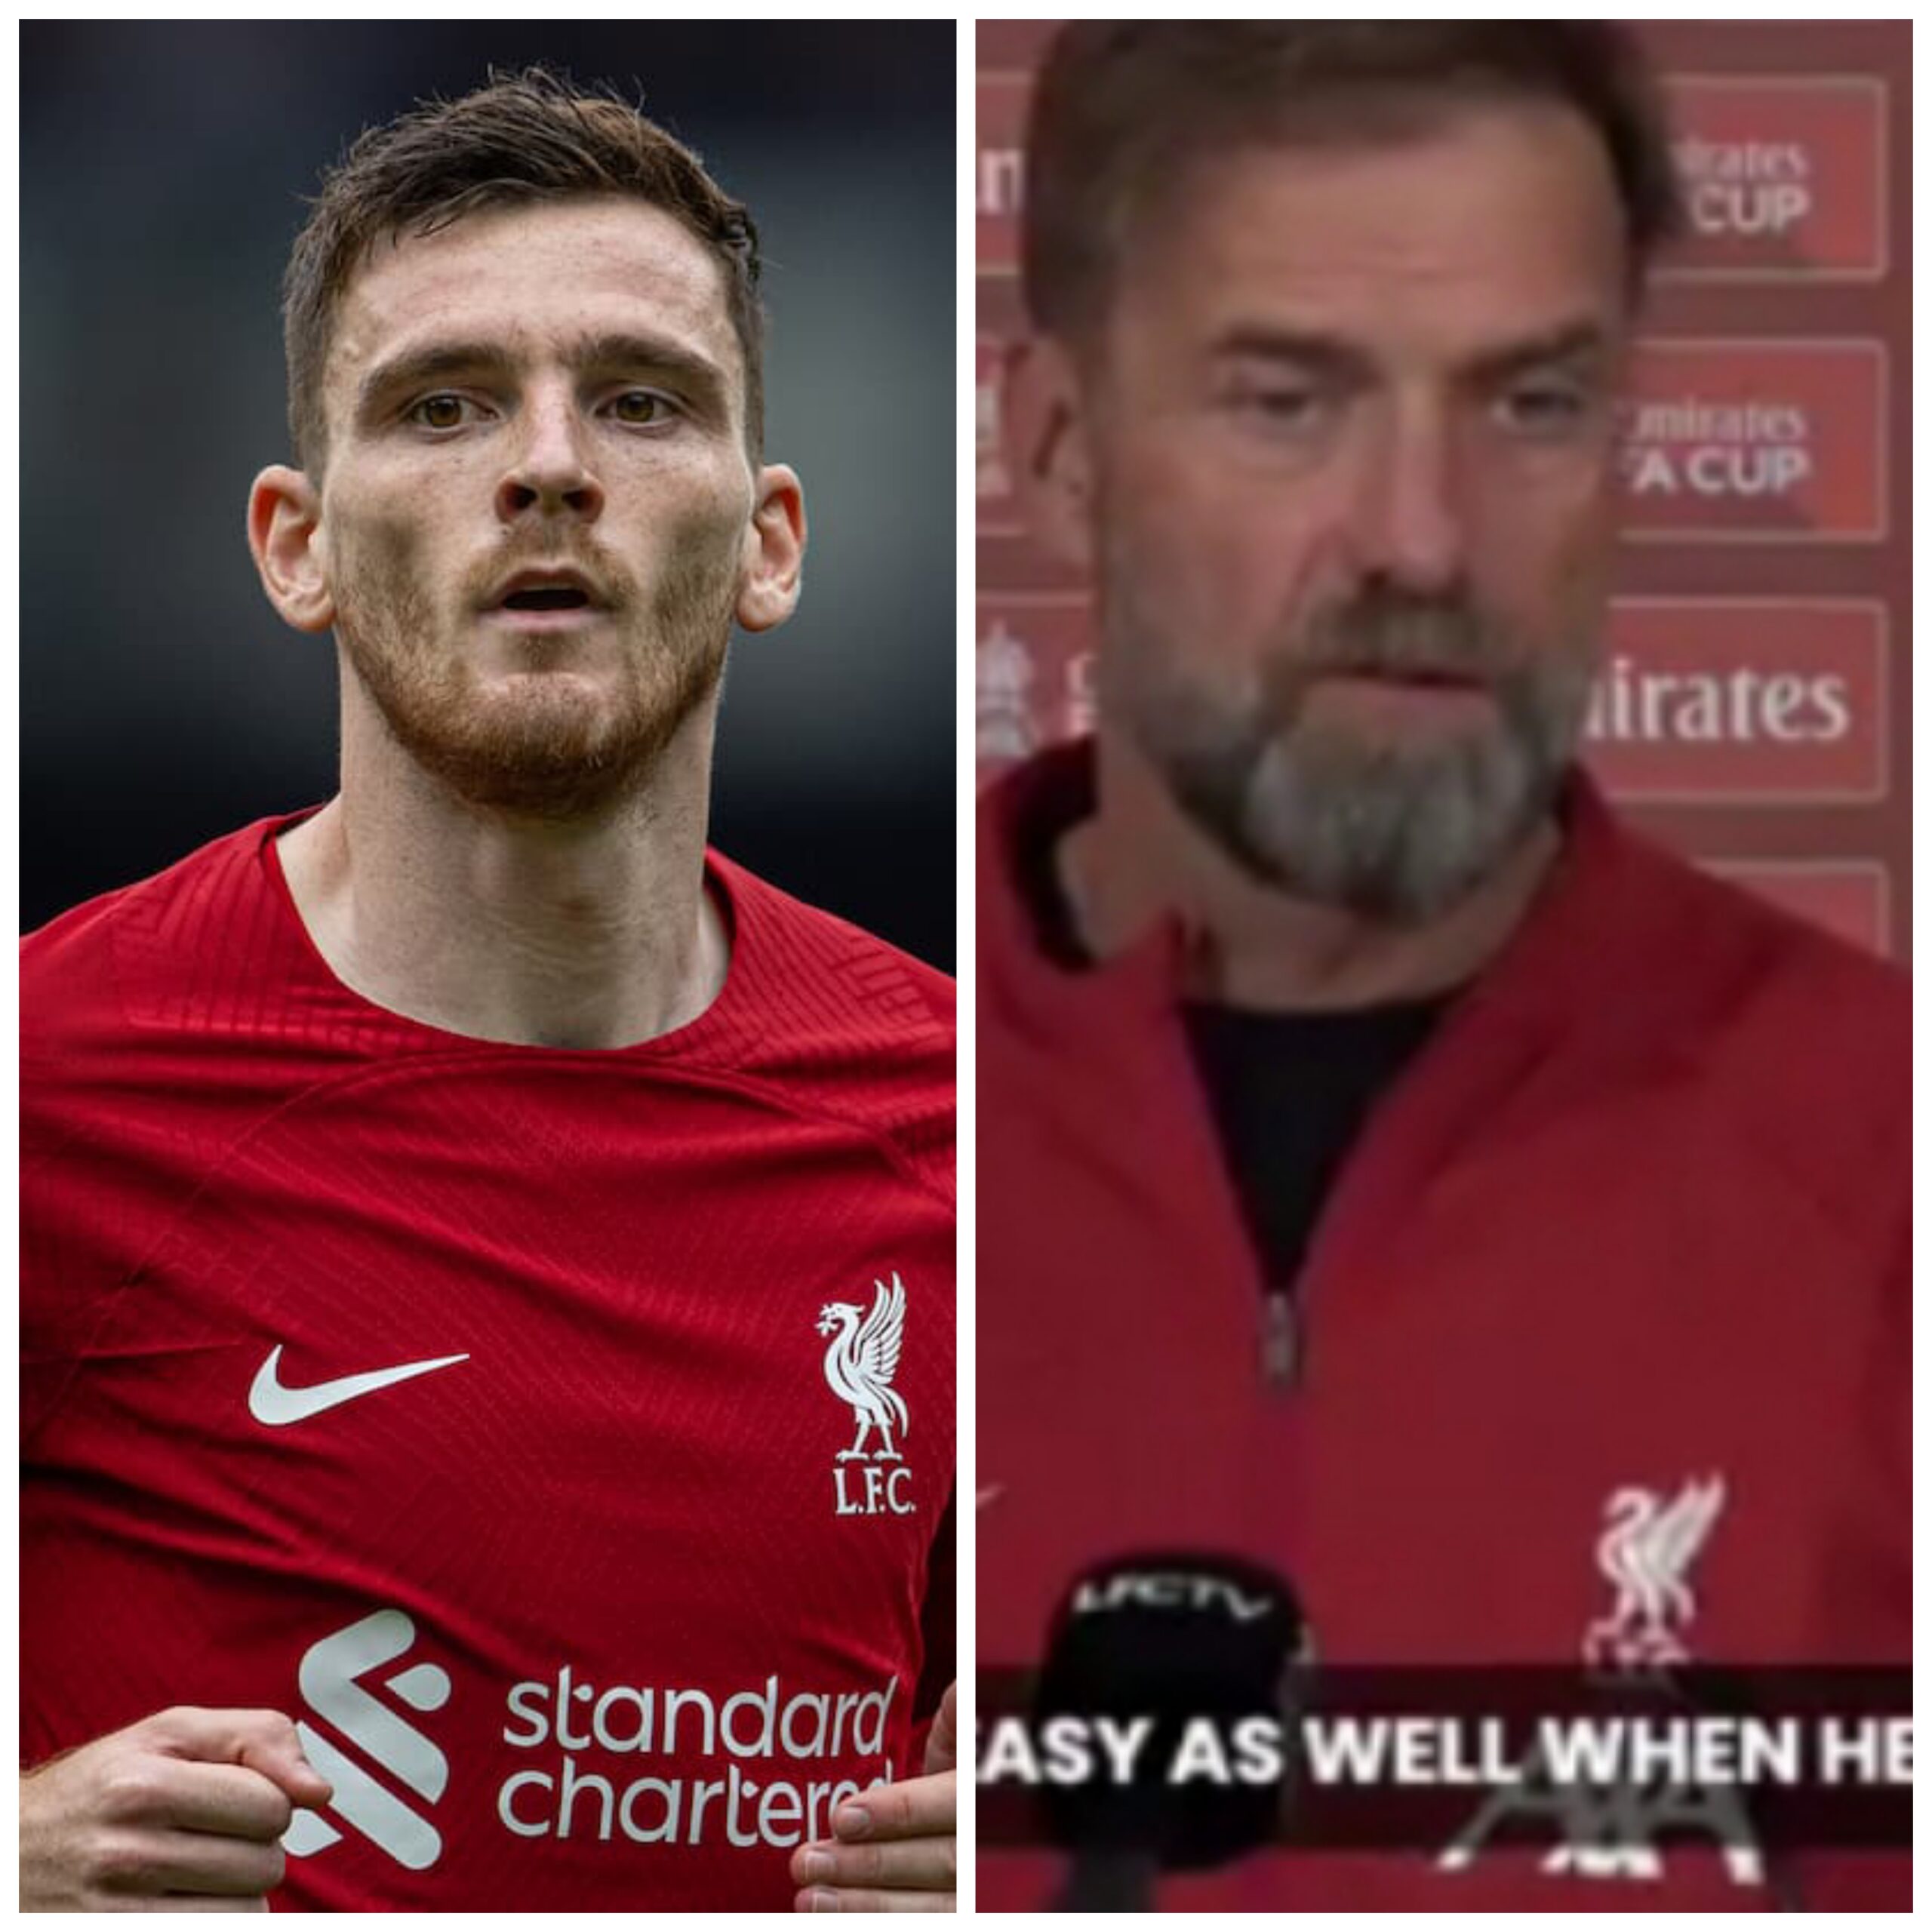 "Not True"-Jurgen Klopp reacts to Andy Robertson's blunt claim that Liverpool are getting worse 13 Sportelo